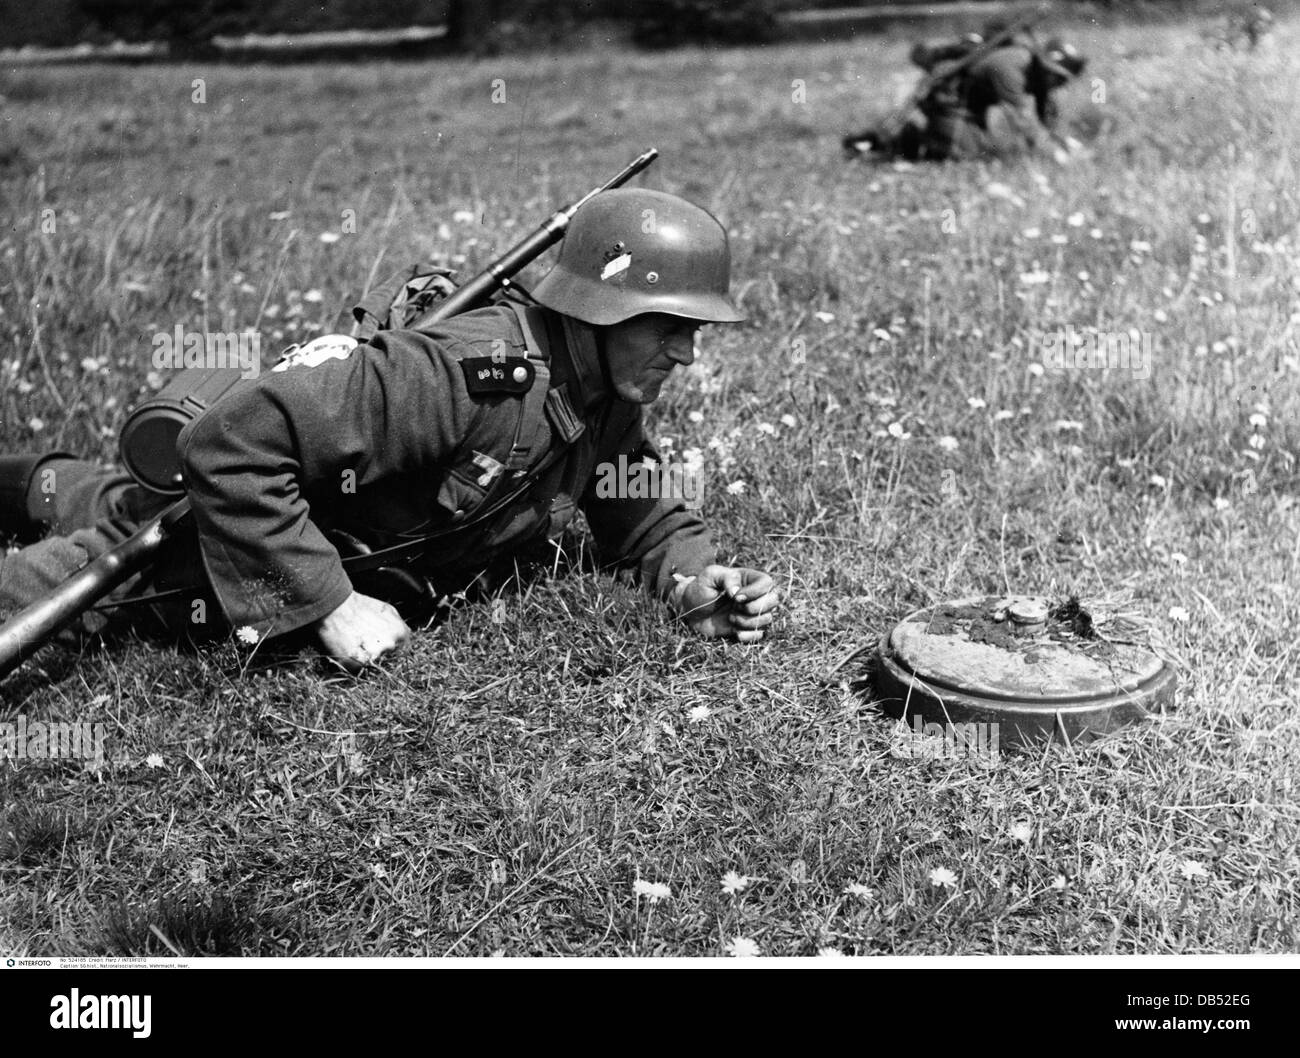 Nazism / National Socialism, military, Wehrmacht, army, sappers, sapper planting a land mine, manoeuvre, circa 1940, Additional-Rights-Clearences-Not Available Stock Photo